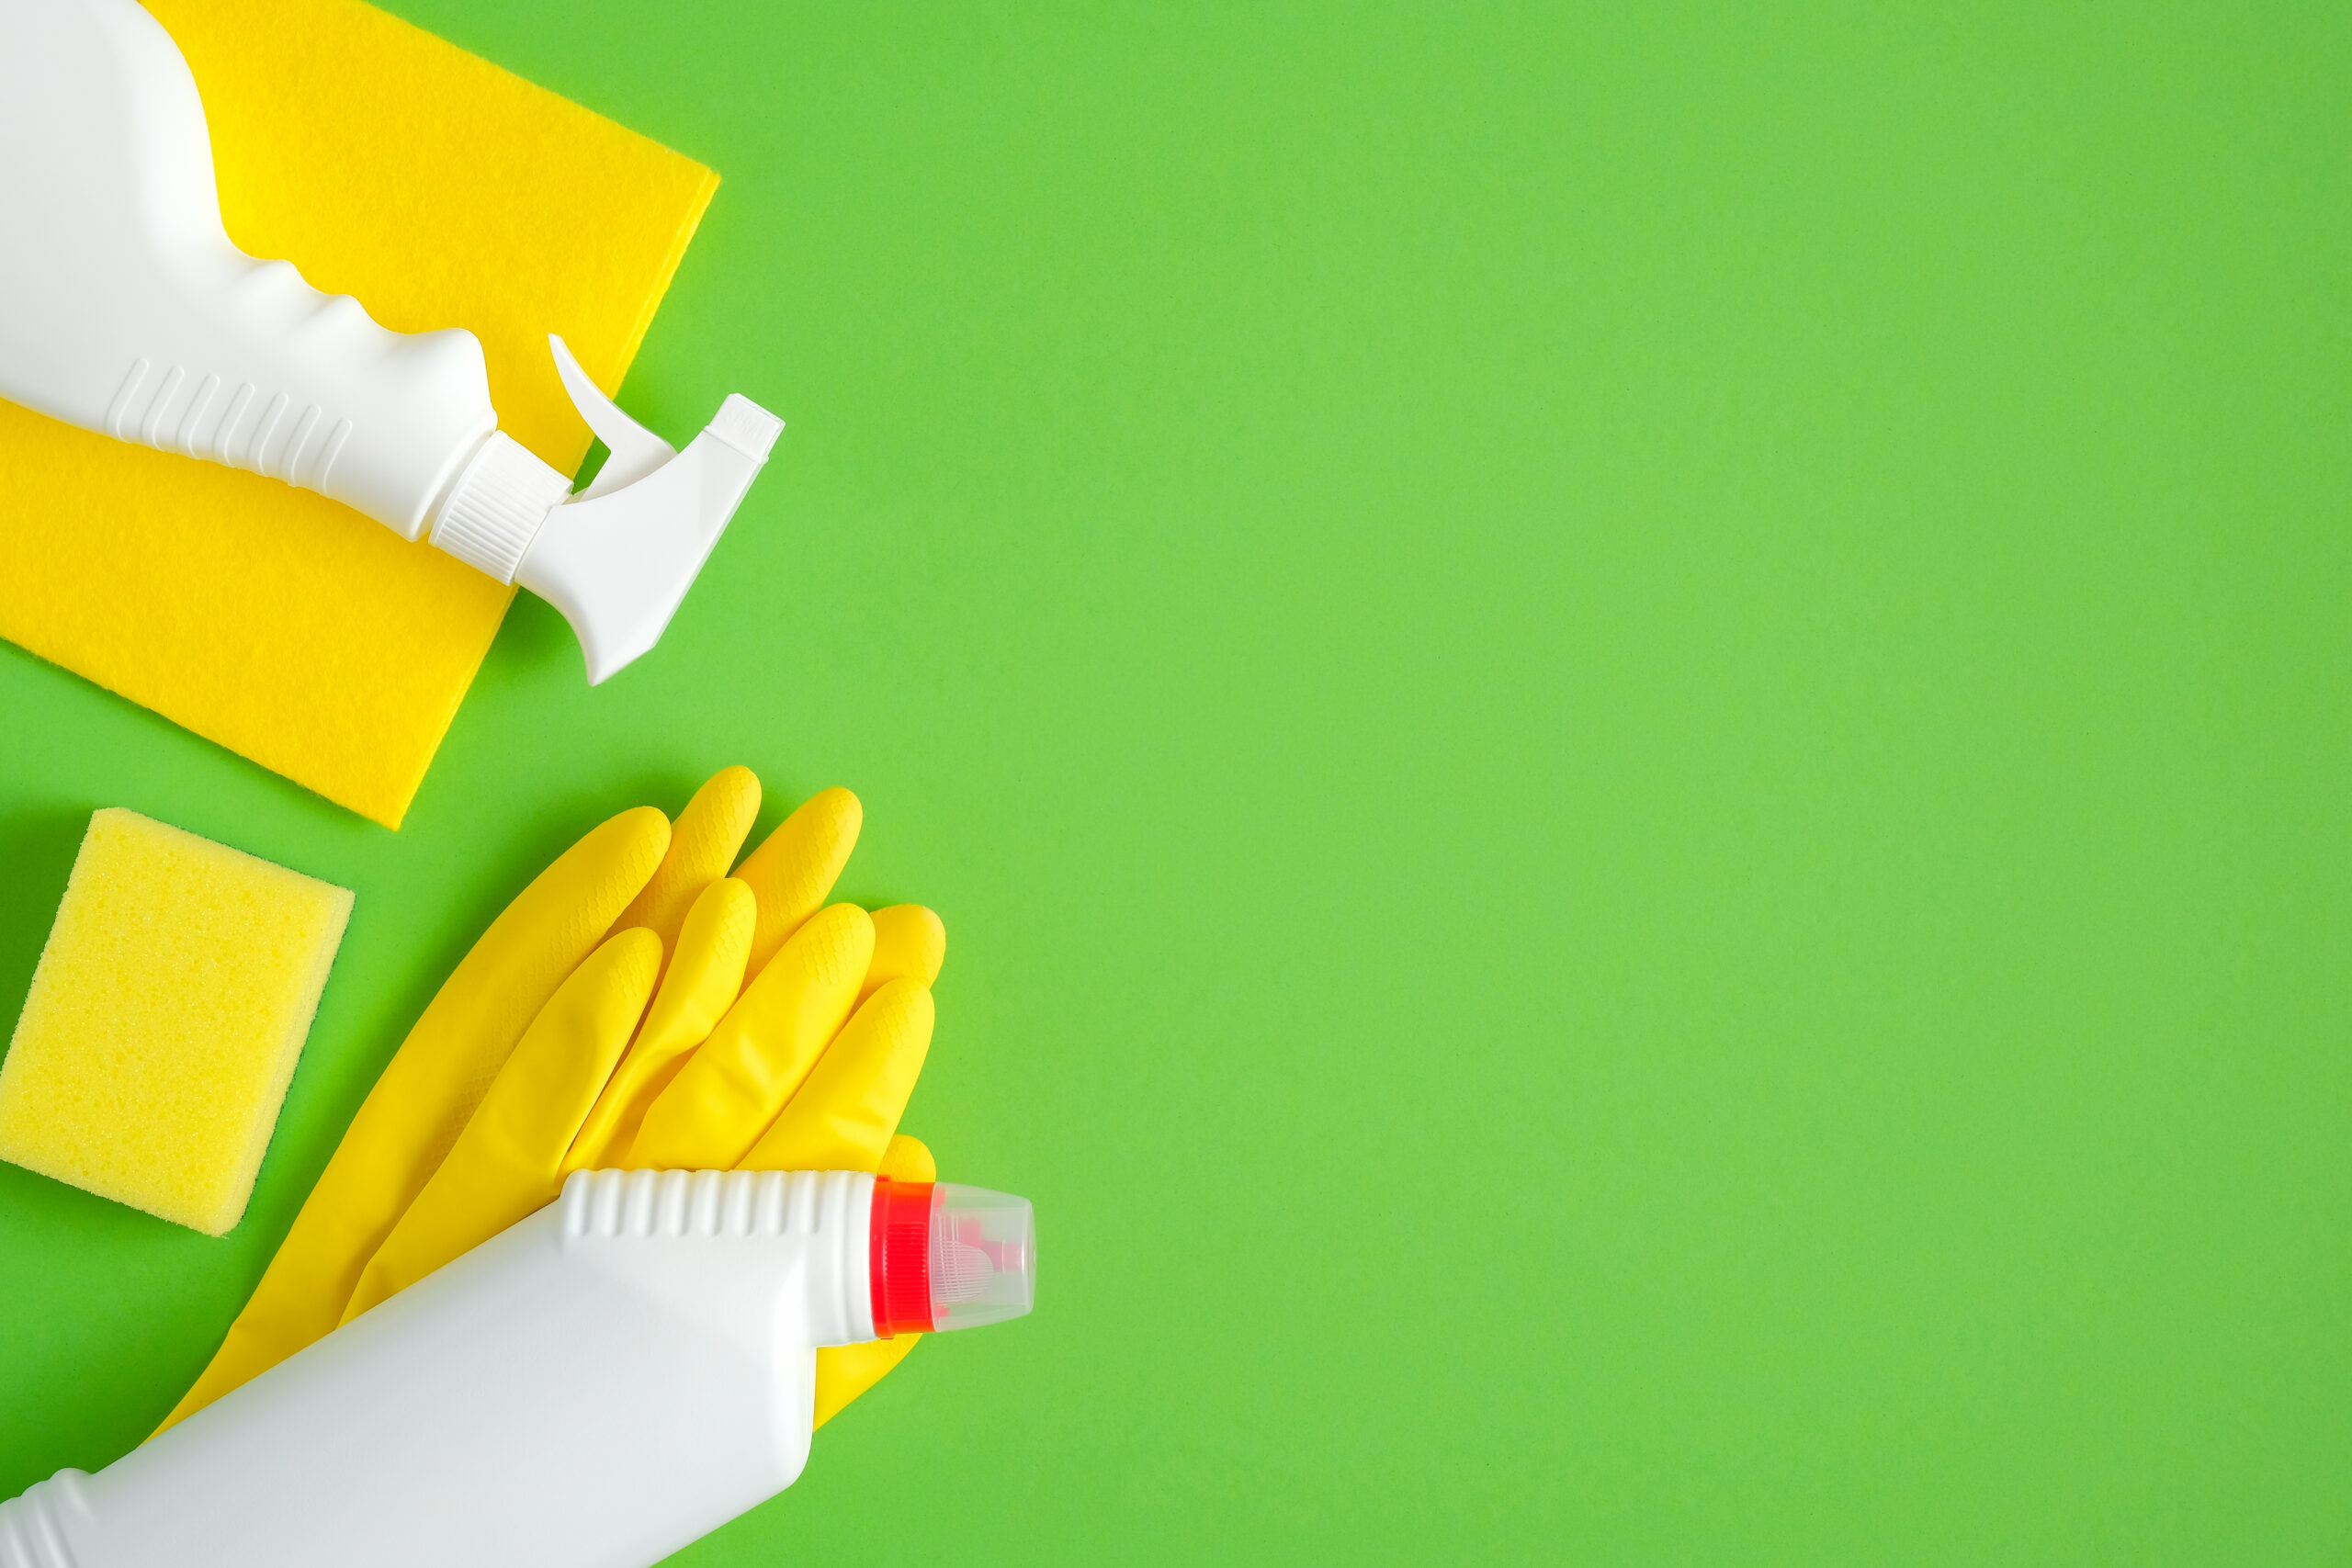 Cleaning supplies on green background. Top view cleaner spray bottle, rag, sponge, detergent, yellow rubber gloves. House cleaning service and housekeeping concept.